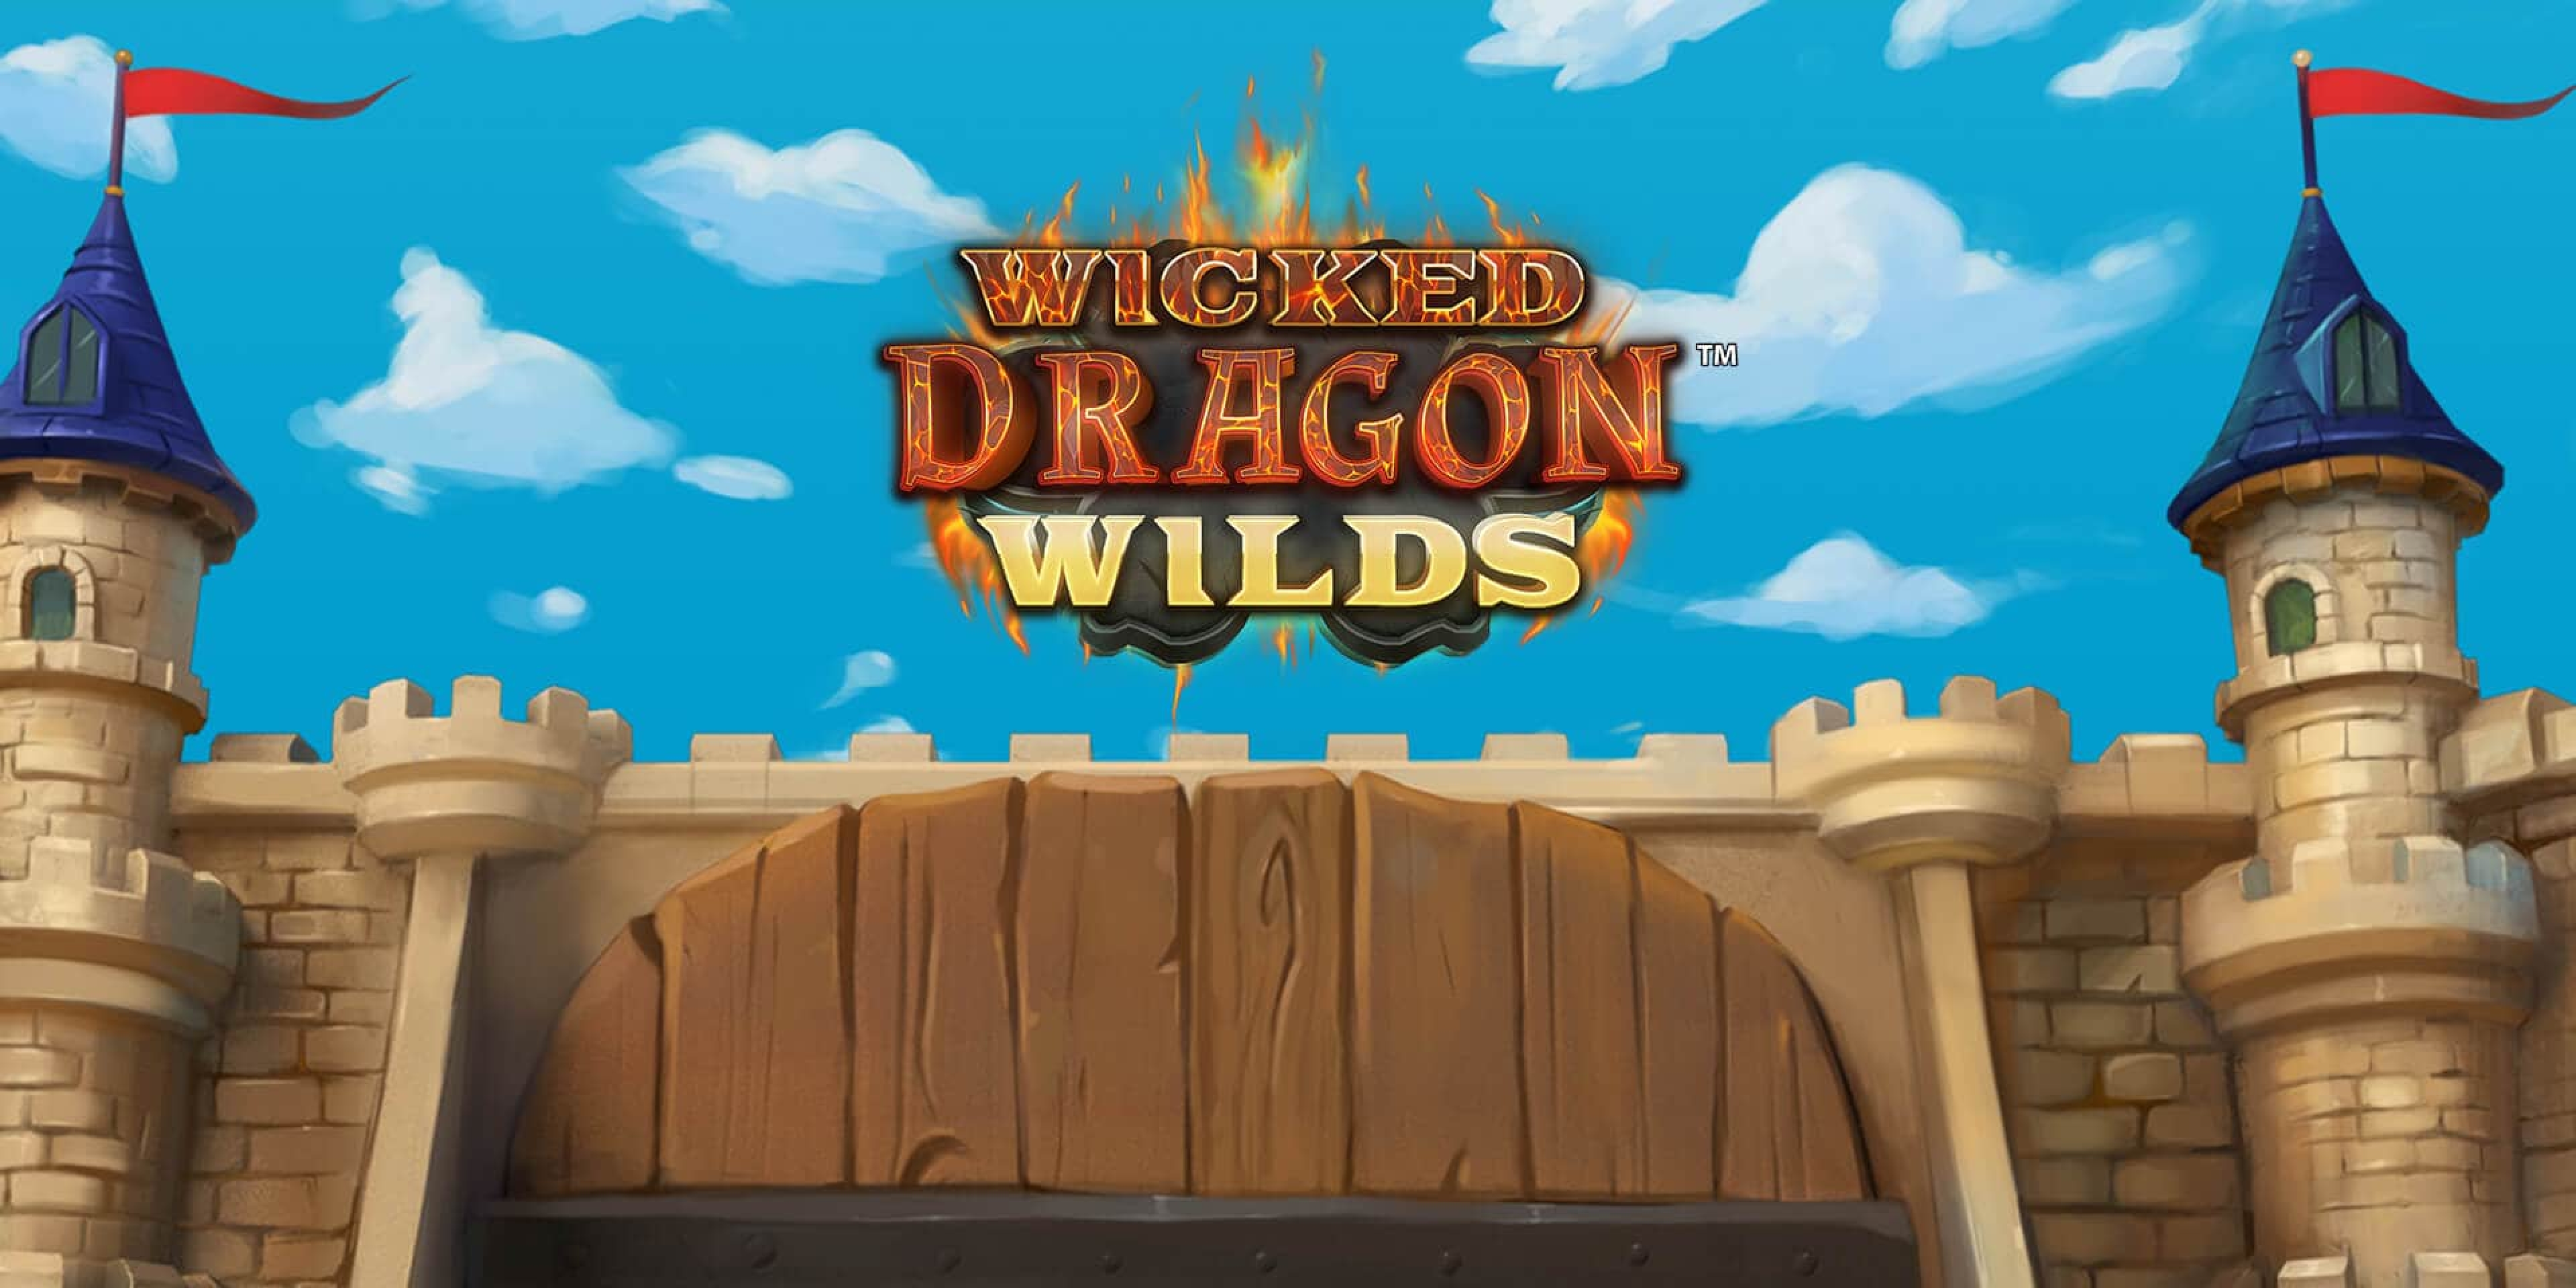 The Wicked Dragon Wilds Online Slot Demo Game by Red7 Mobile